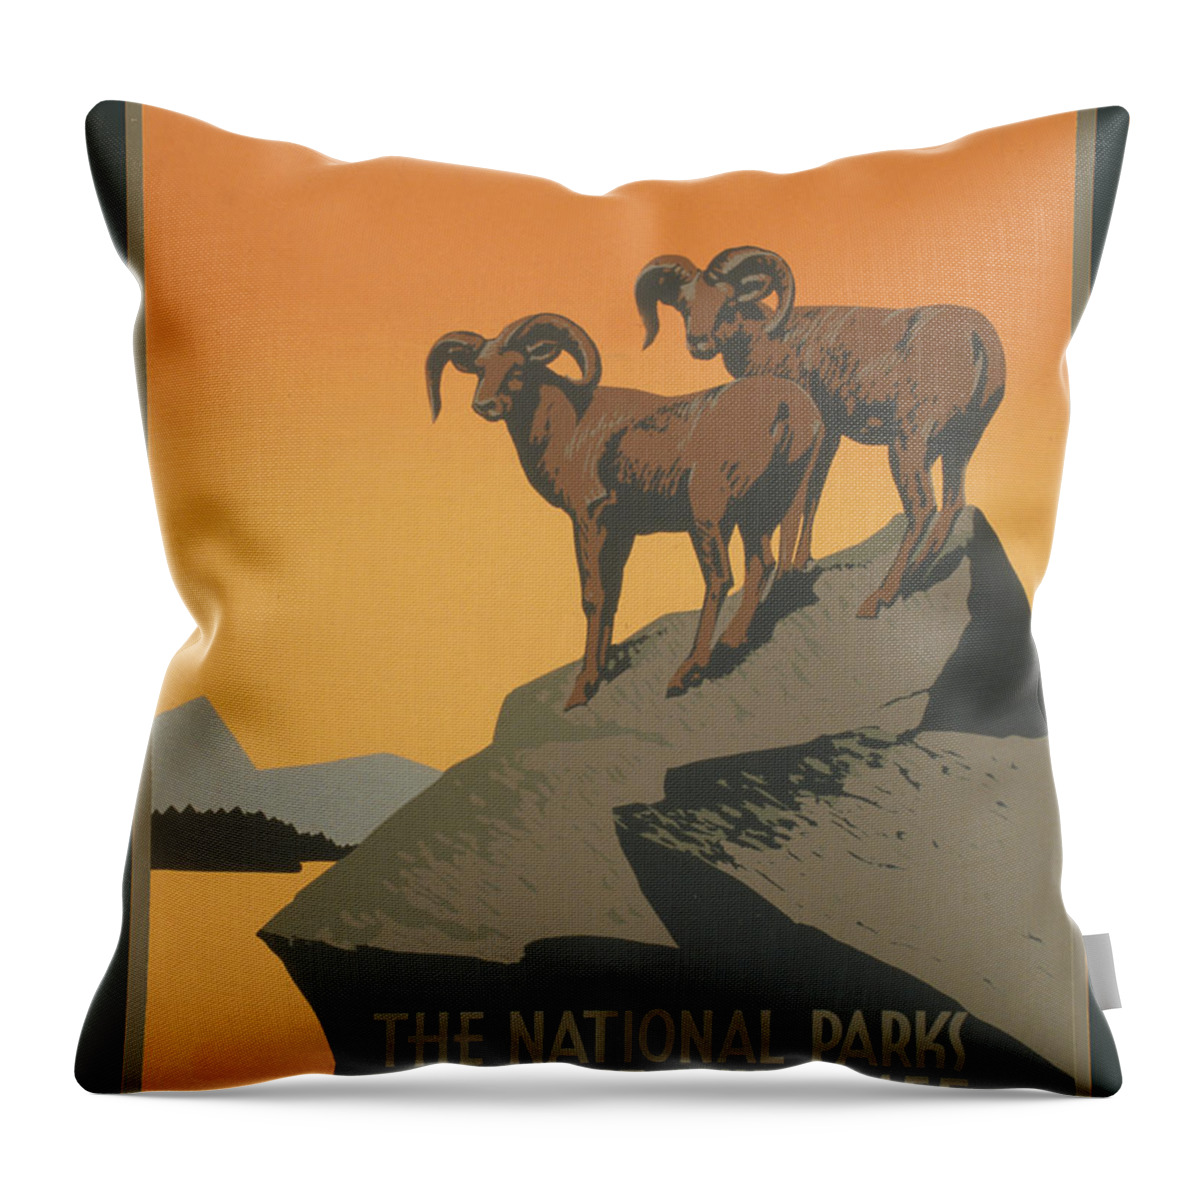 Rreserve Wildlife Throw Pillow featuring the digital art Rreserve Wildlife by Unknown